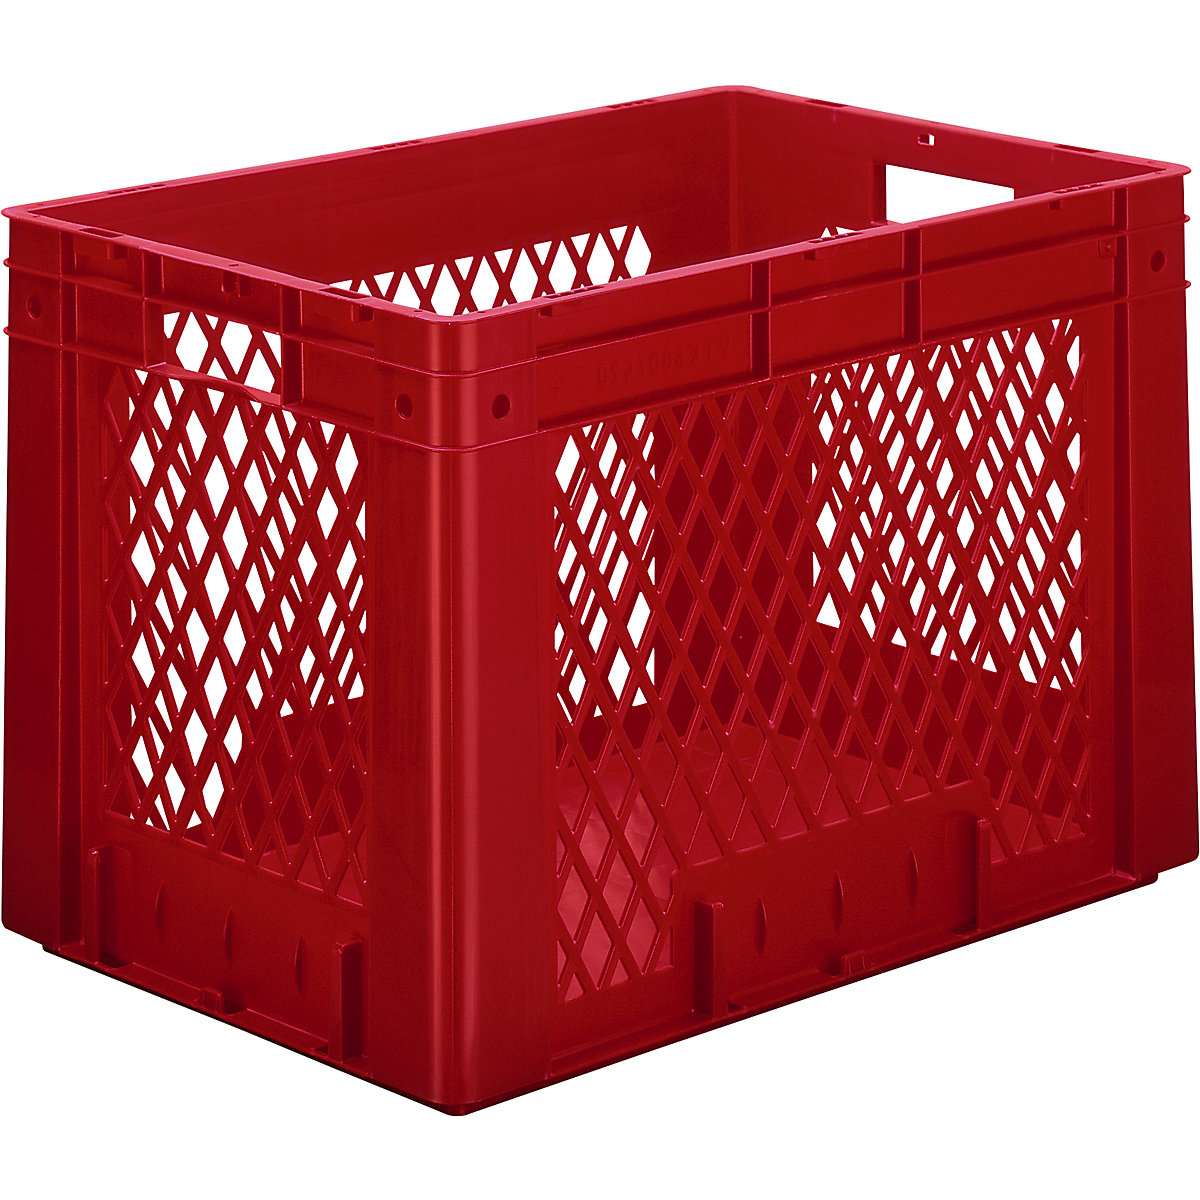 Heavy duty Euro container, polypropylene, capacity 80 l, LxWxH 600 x 400 x 420 mm, perforated walls, solid base, red, pack of 2-4